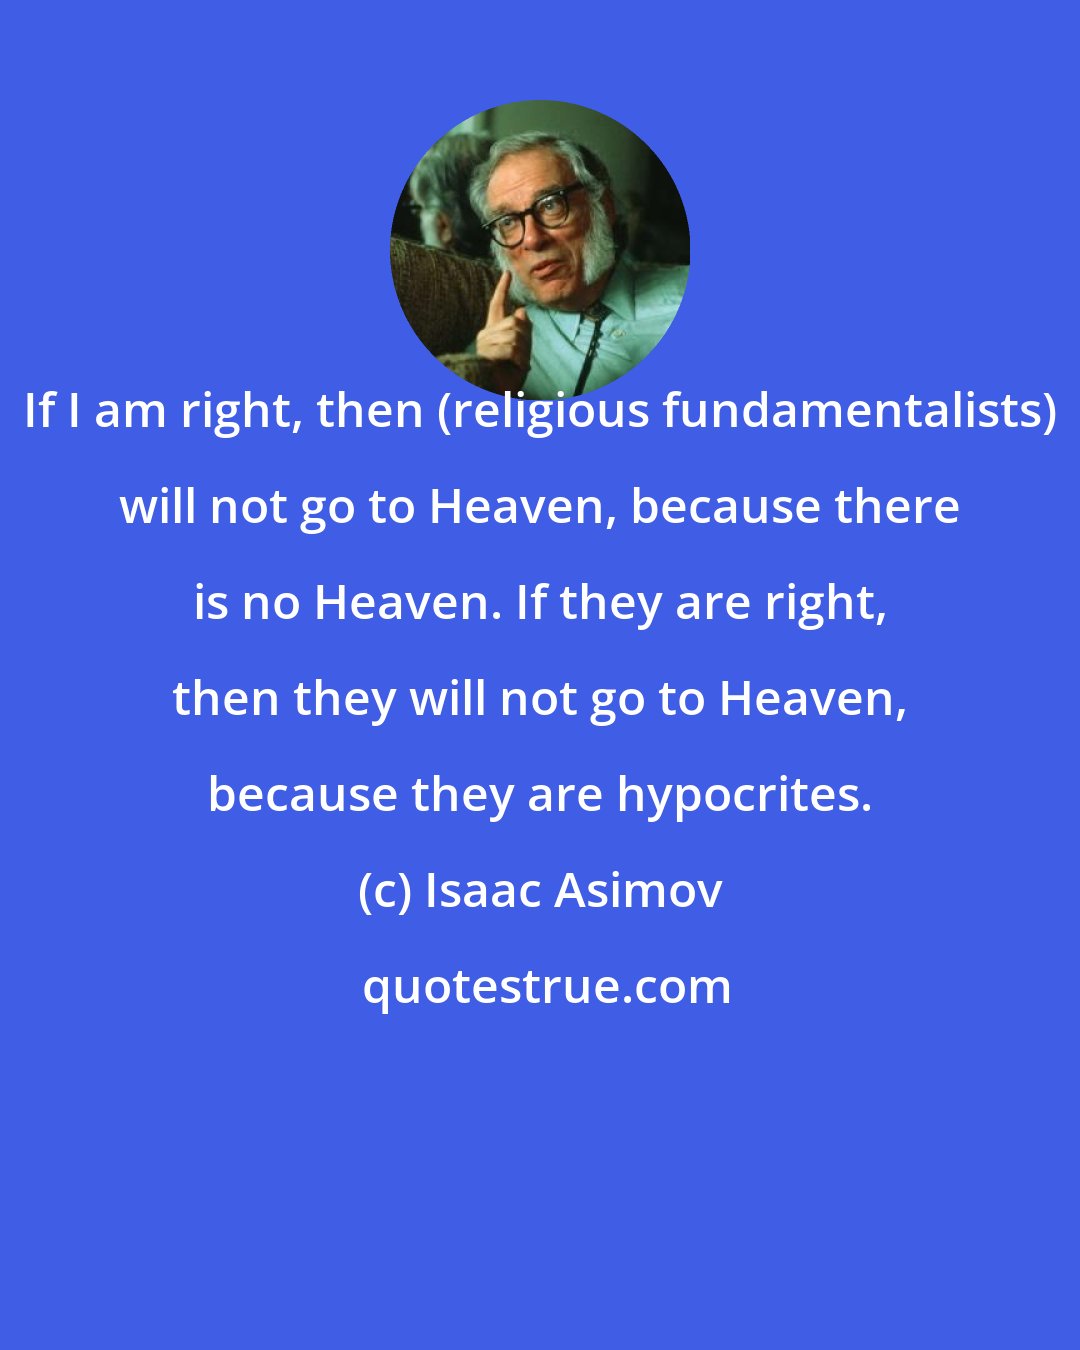 Isaac Asimov: If I am right, then (religious fundamentalists) will not go to Heaven, because there is no Heaven. If they are right, then they will not go to Heaven, because they are hypocrites.